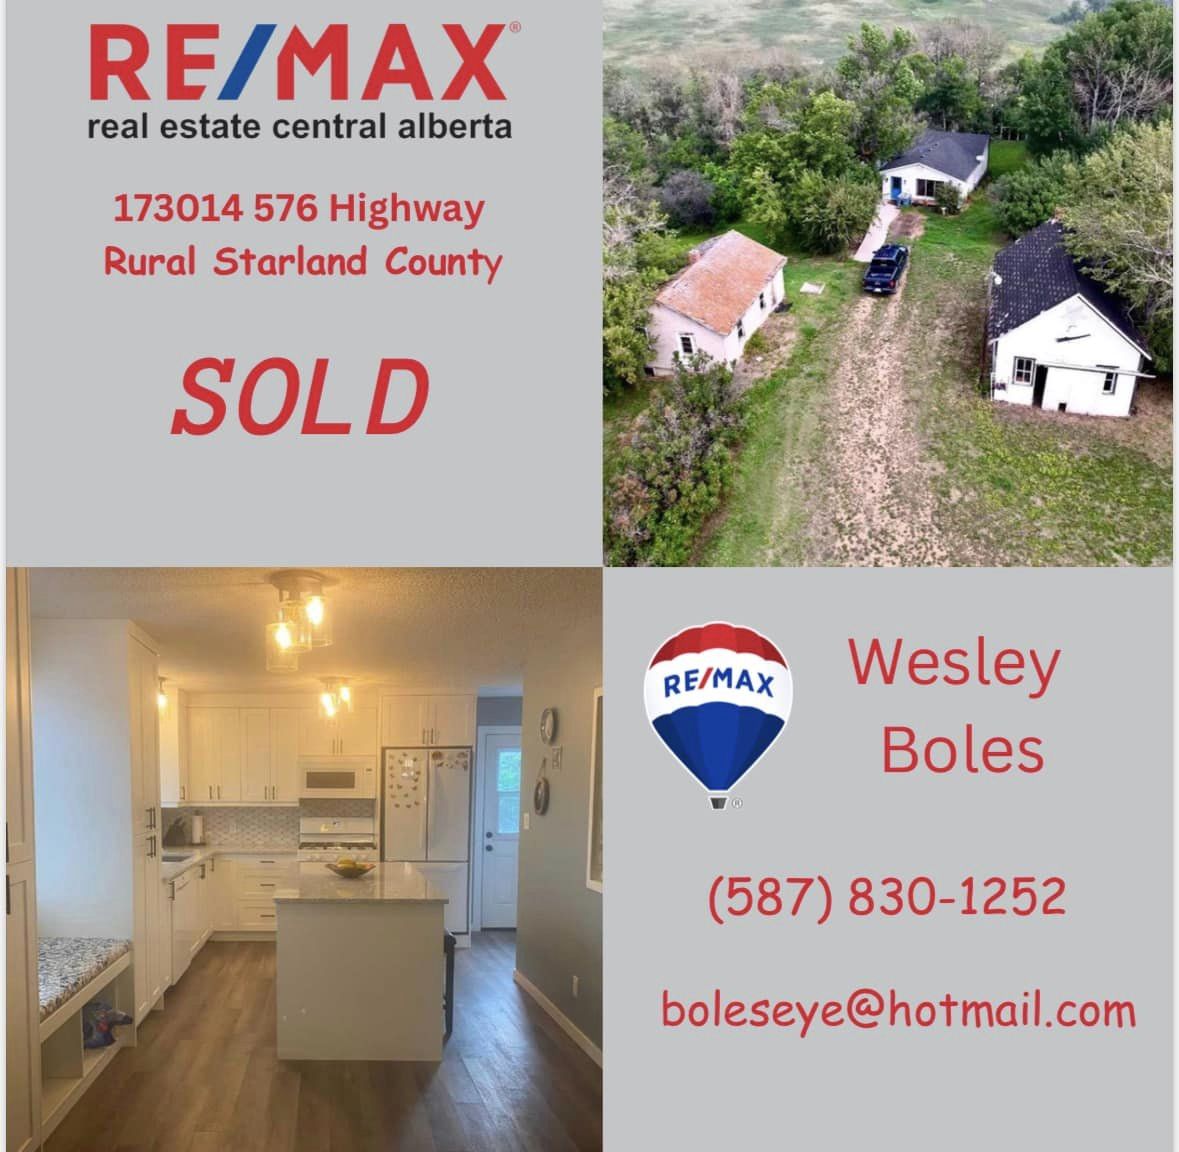 Re/Max Real Estate Central 107 6 Ave S, Three Hills Alberta T0M 2A0